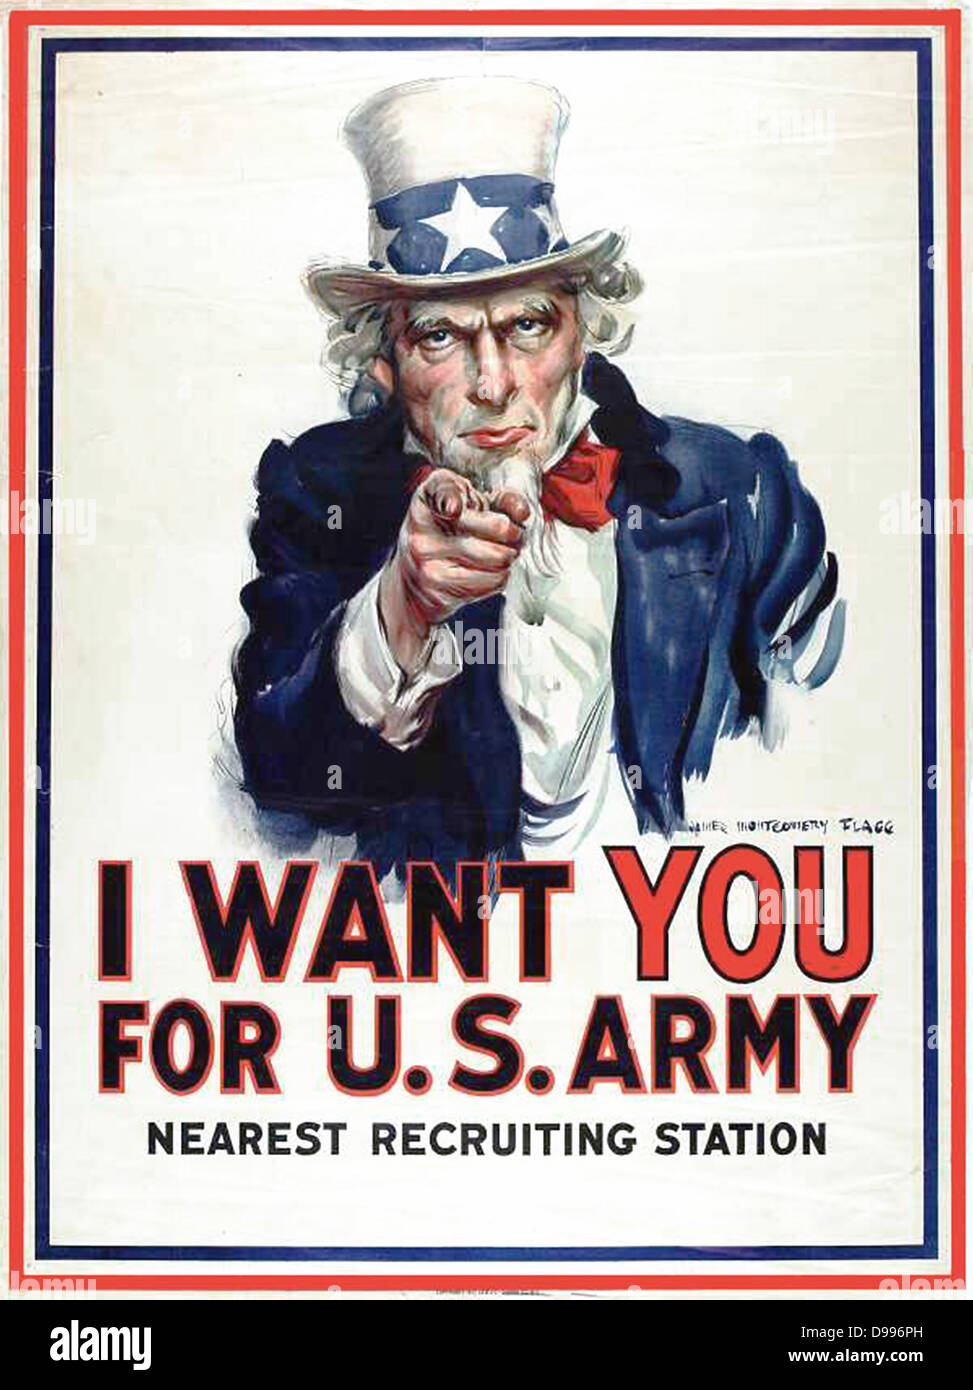 VINTAGE FOLLOW ME US ARMY RECRUITER ADVERTISING REPRODUCTION POSTCARD 